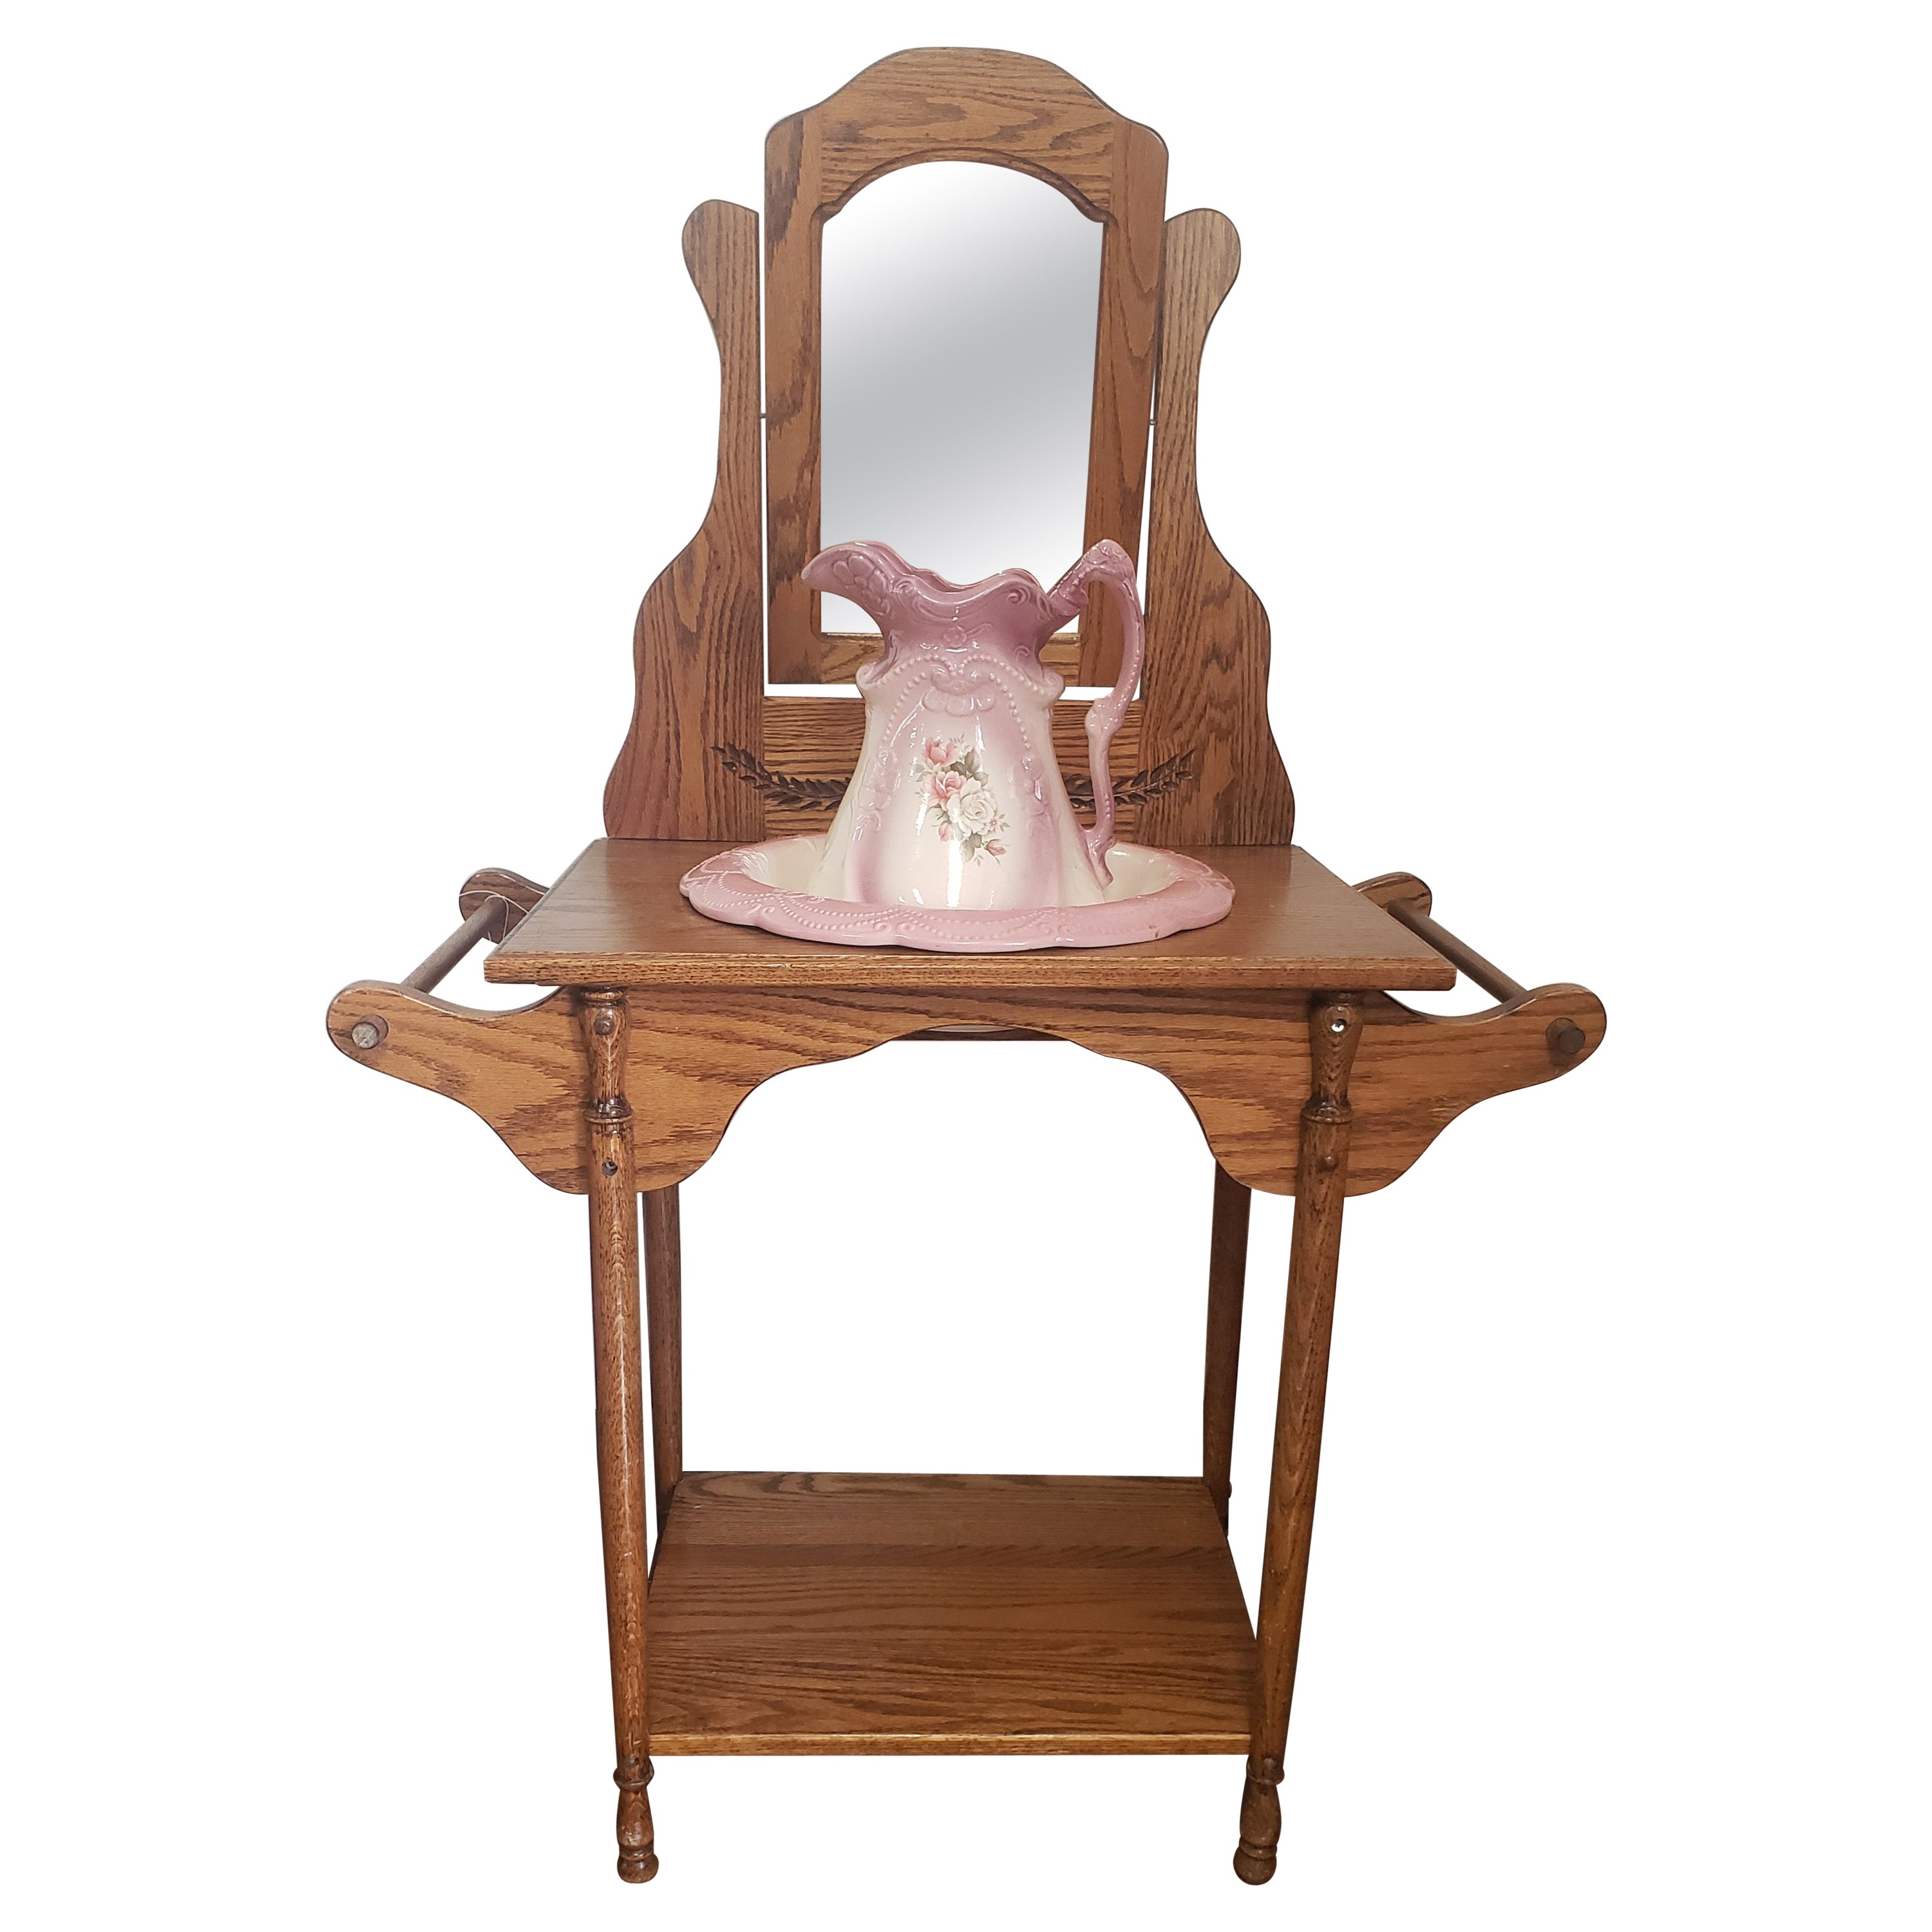 1890 English Ironstone Basin and Pitcher on Mirrored Oak Washstand For Sale